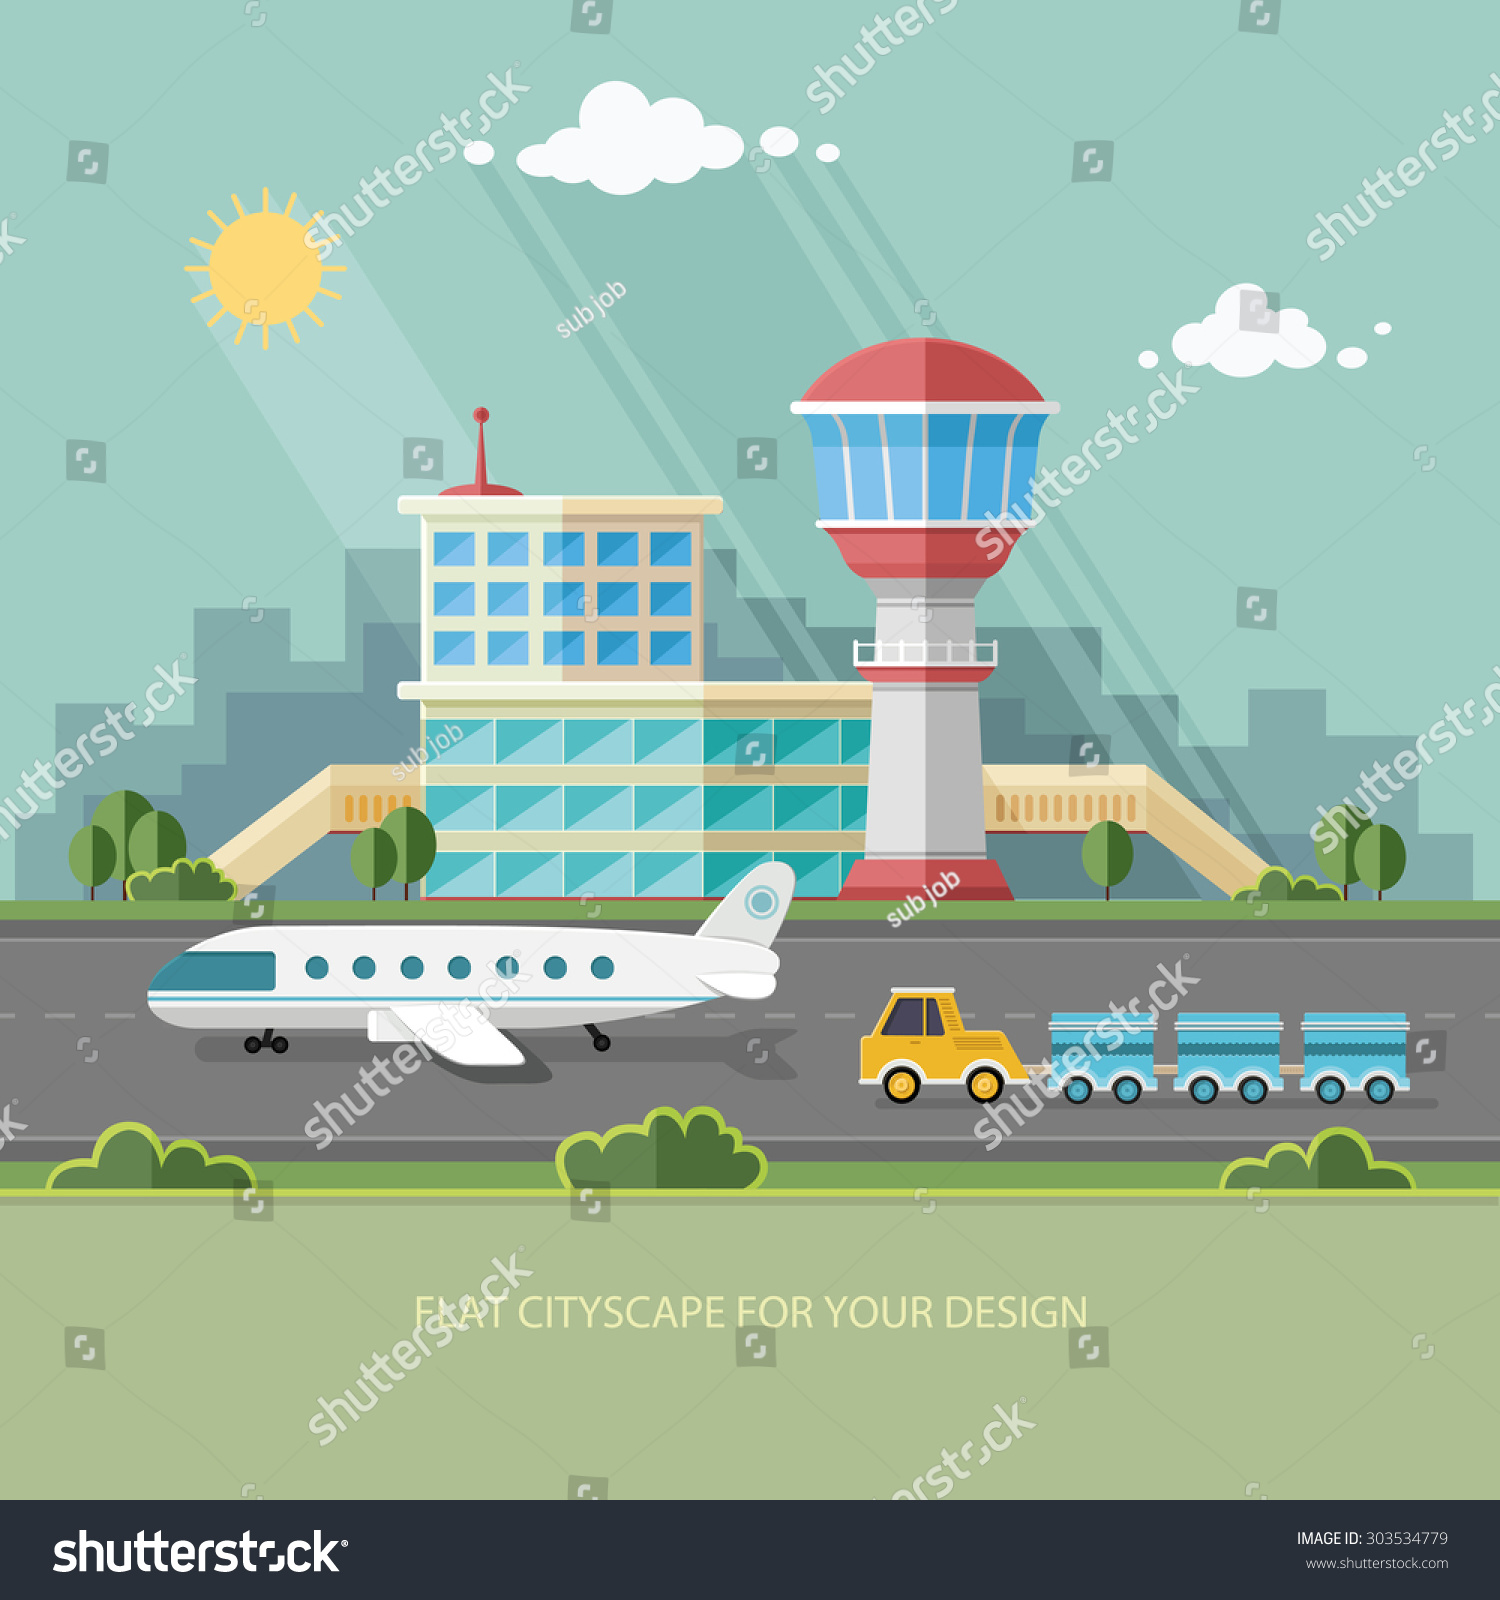 clipart of airport - photo #15